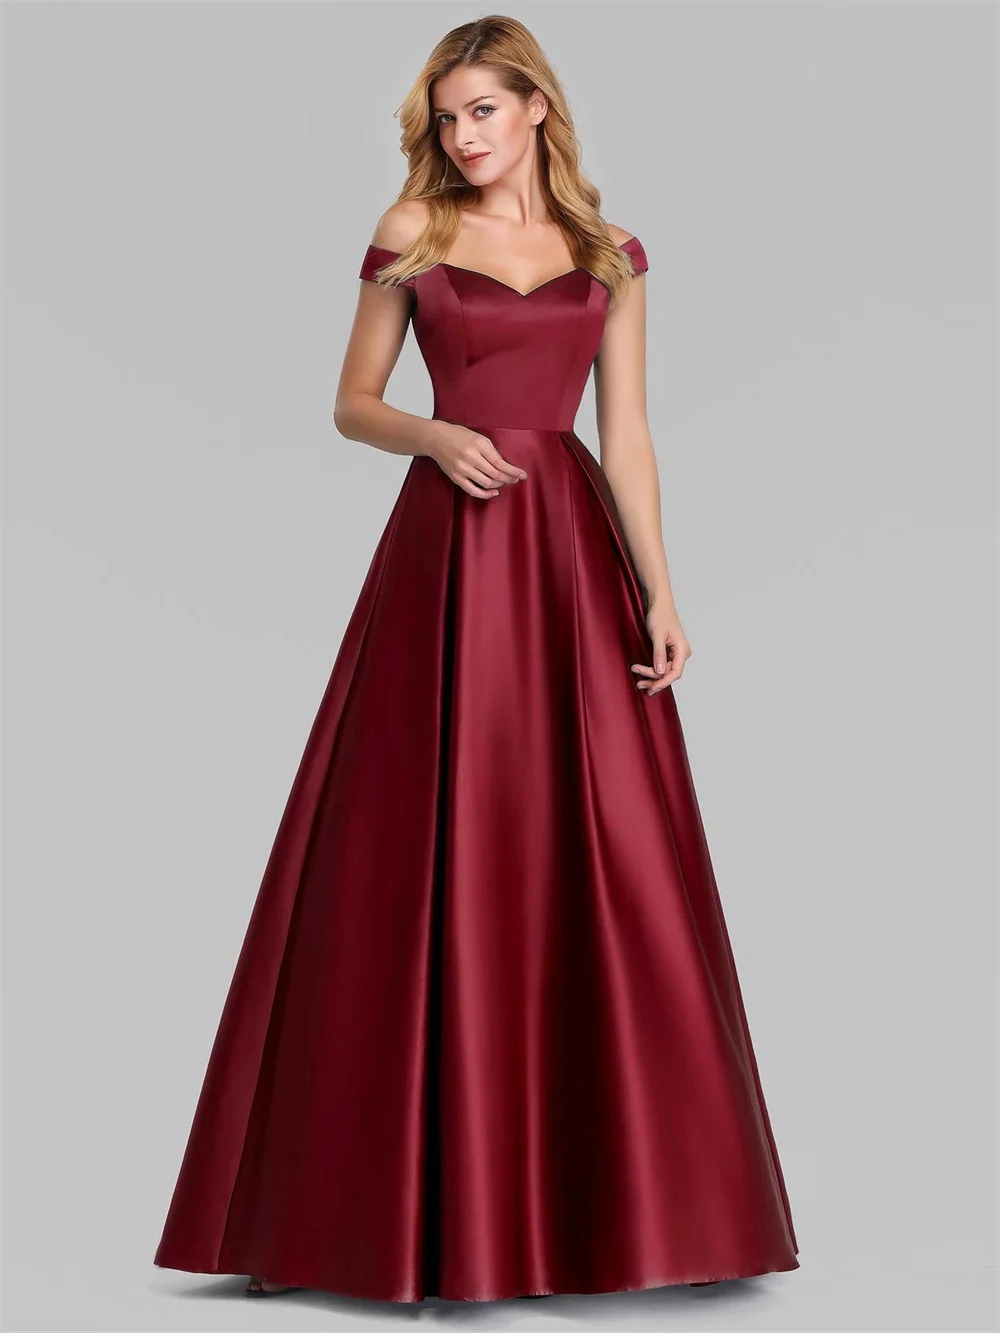 Elegant Women Evening Party Dress 2023 New in Sexy V-neck High Waist Maxi Gowns Ladies Boutique Prom Quinceanera Dresses sexy deep v neck long sleeve high waist maxi dress women s plus size clothes side high slit party dresses dropshipping wholesale